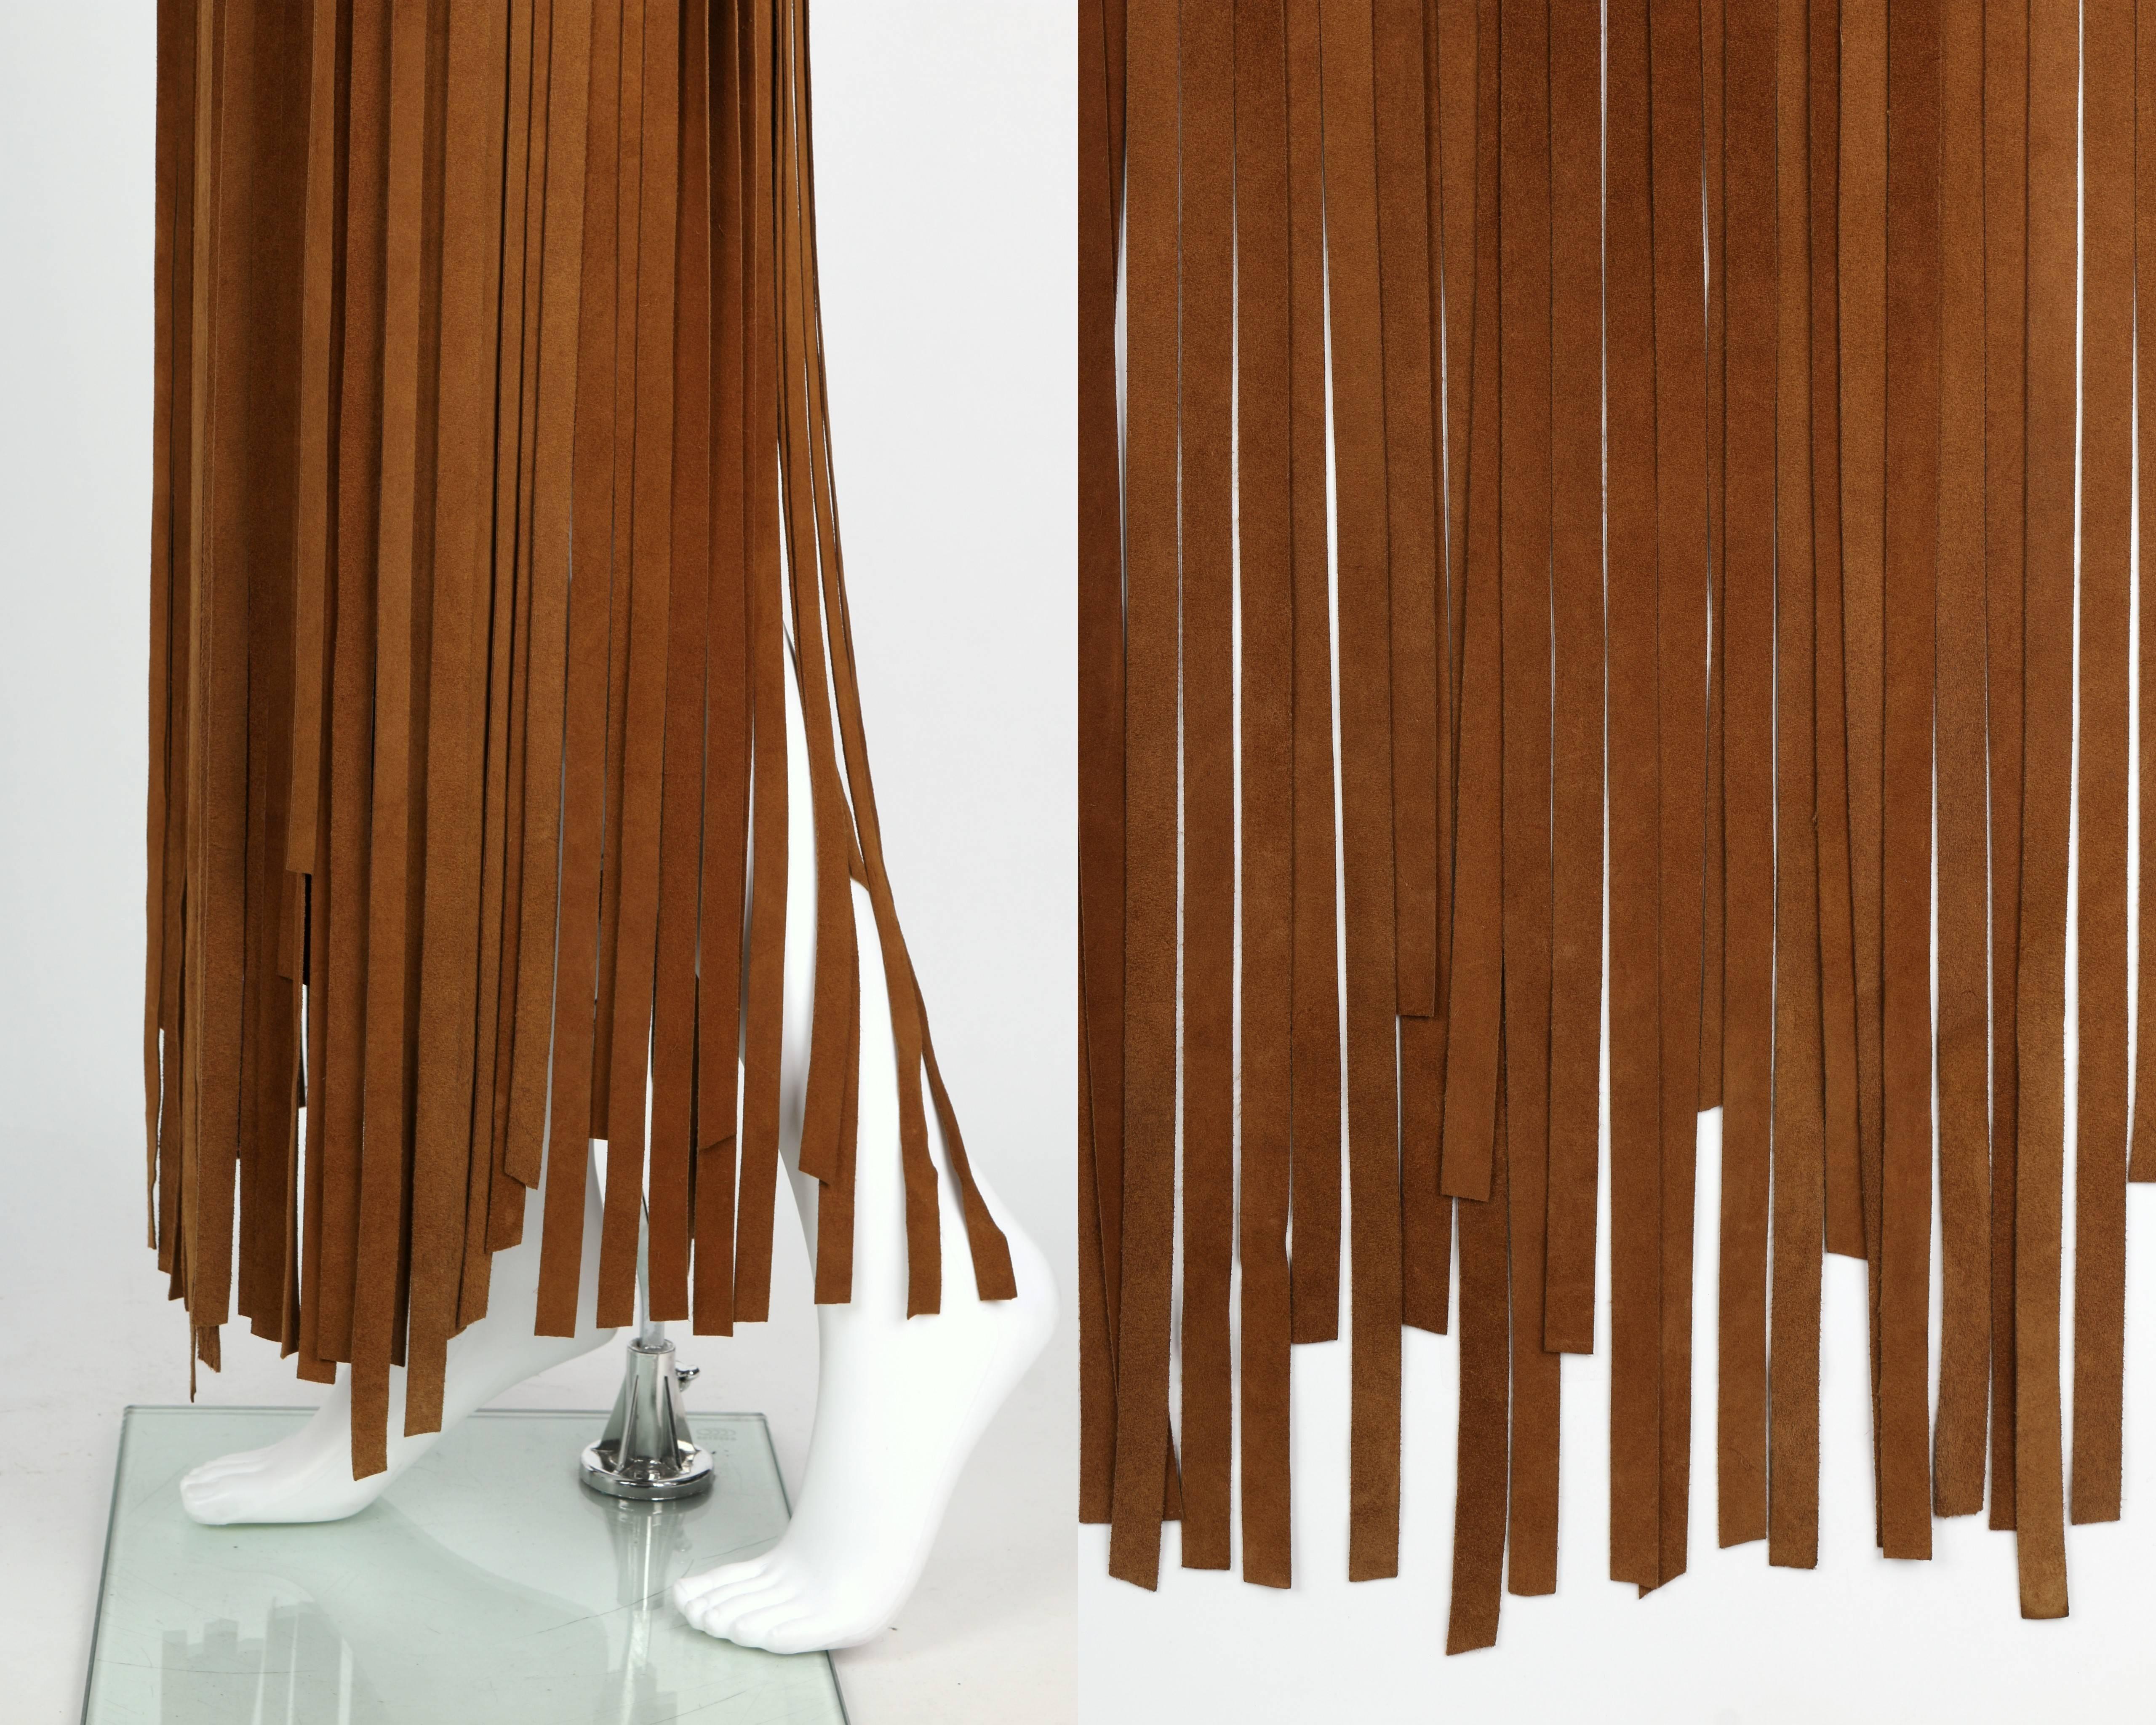 HERMES 1970s Brown Calf Skin Suede Leather Mini Long Maxi Fringe Skirt Size 38 2